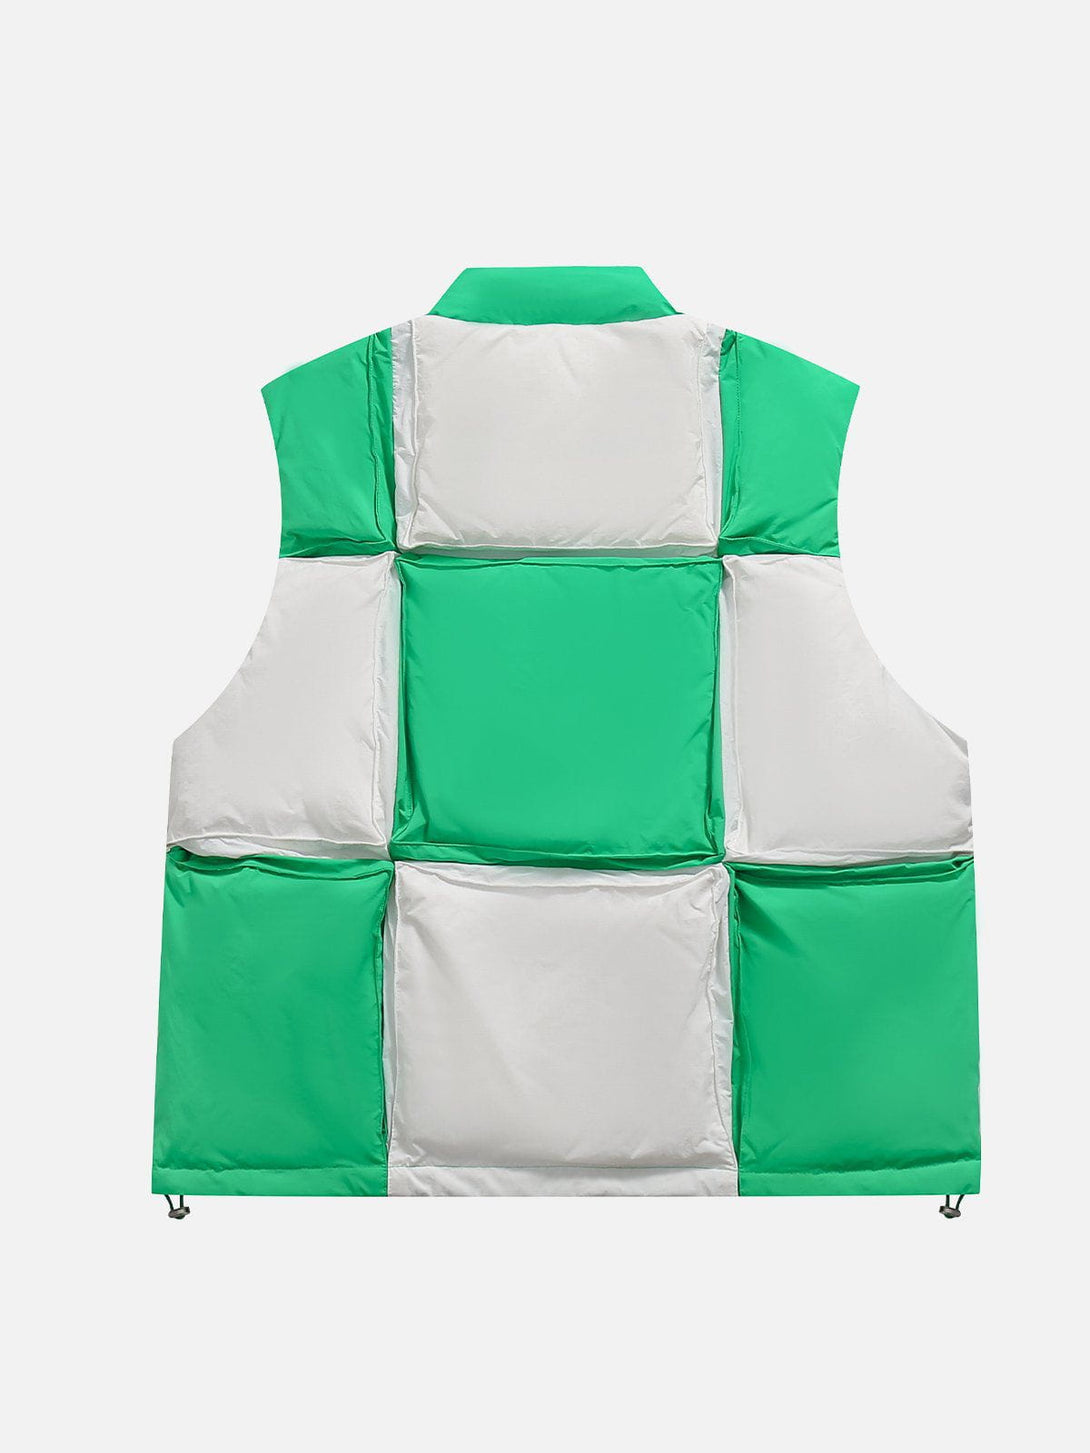 Levefly - PLAID Color Blocking Down Gilet - Streetwear Fashion - levefly.com